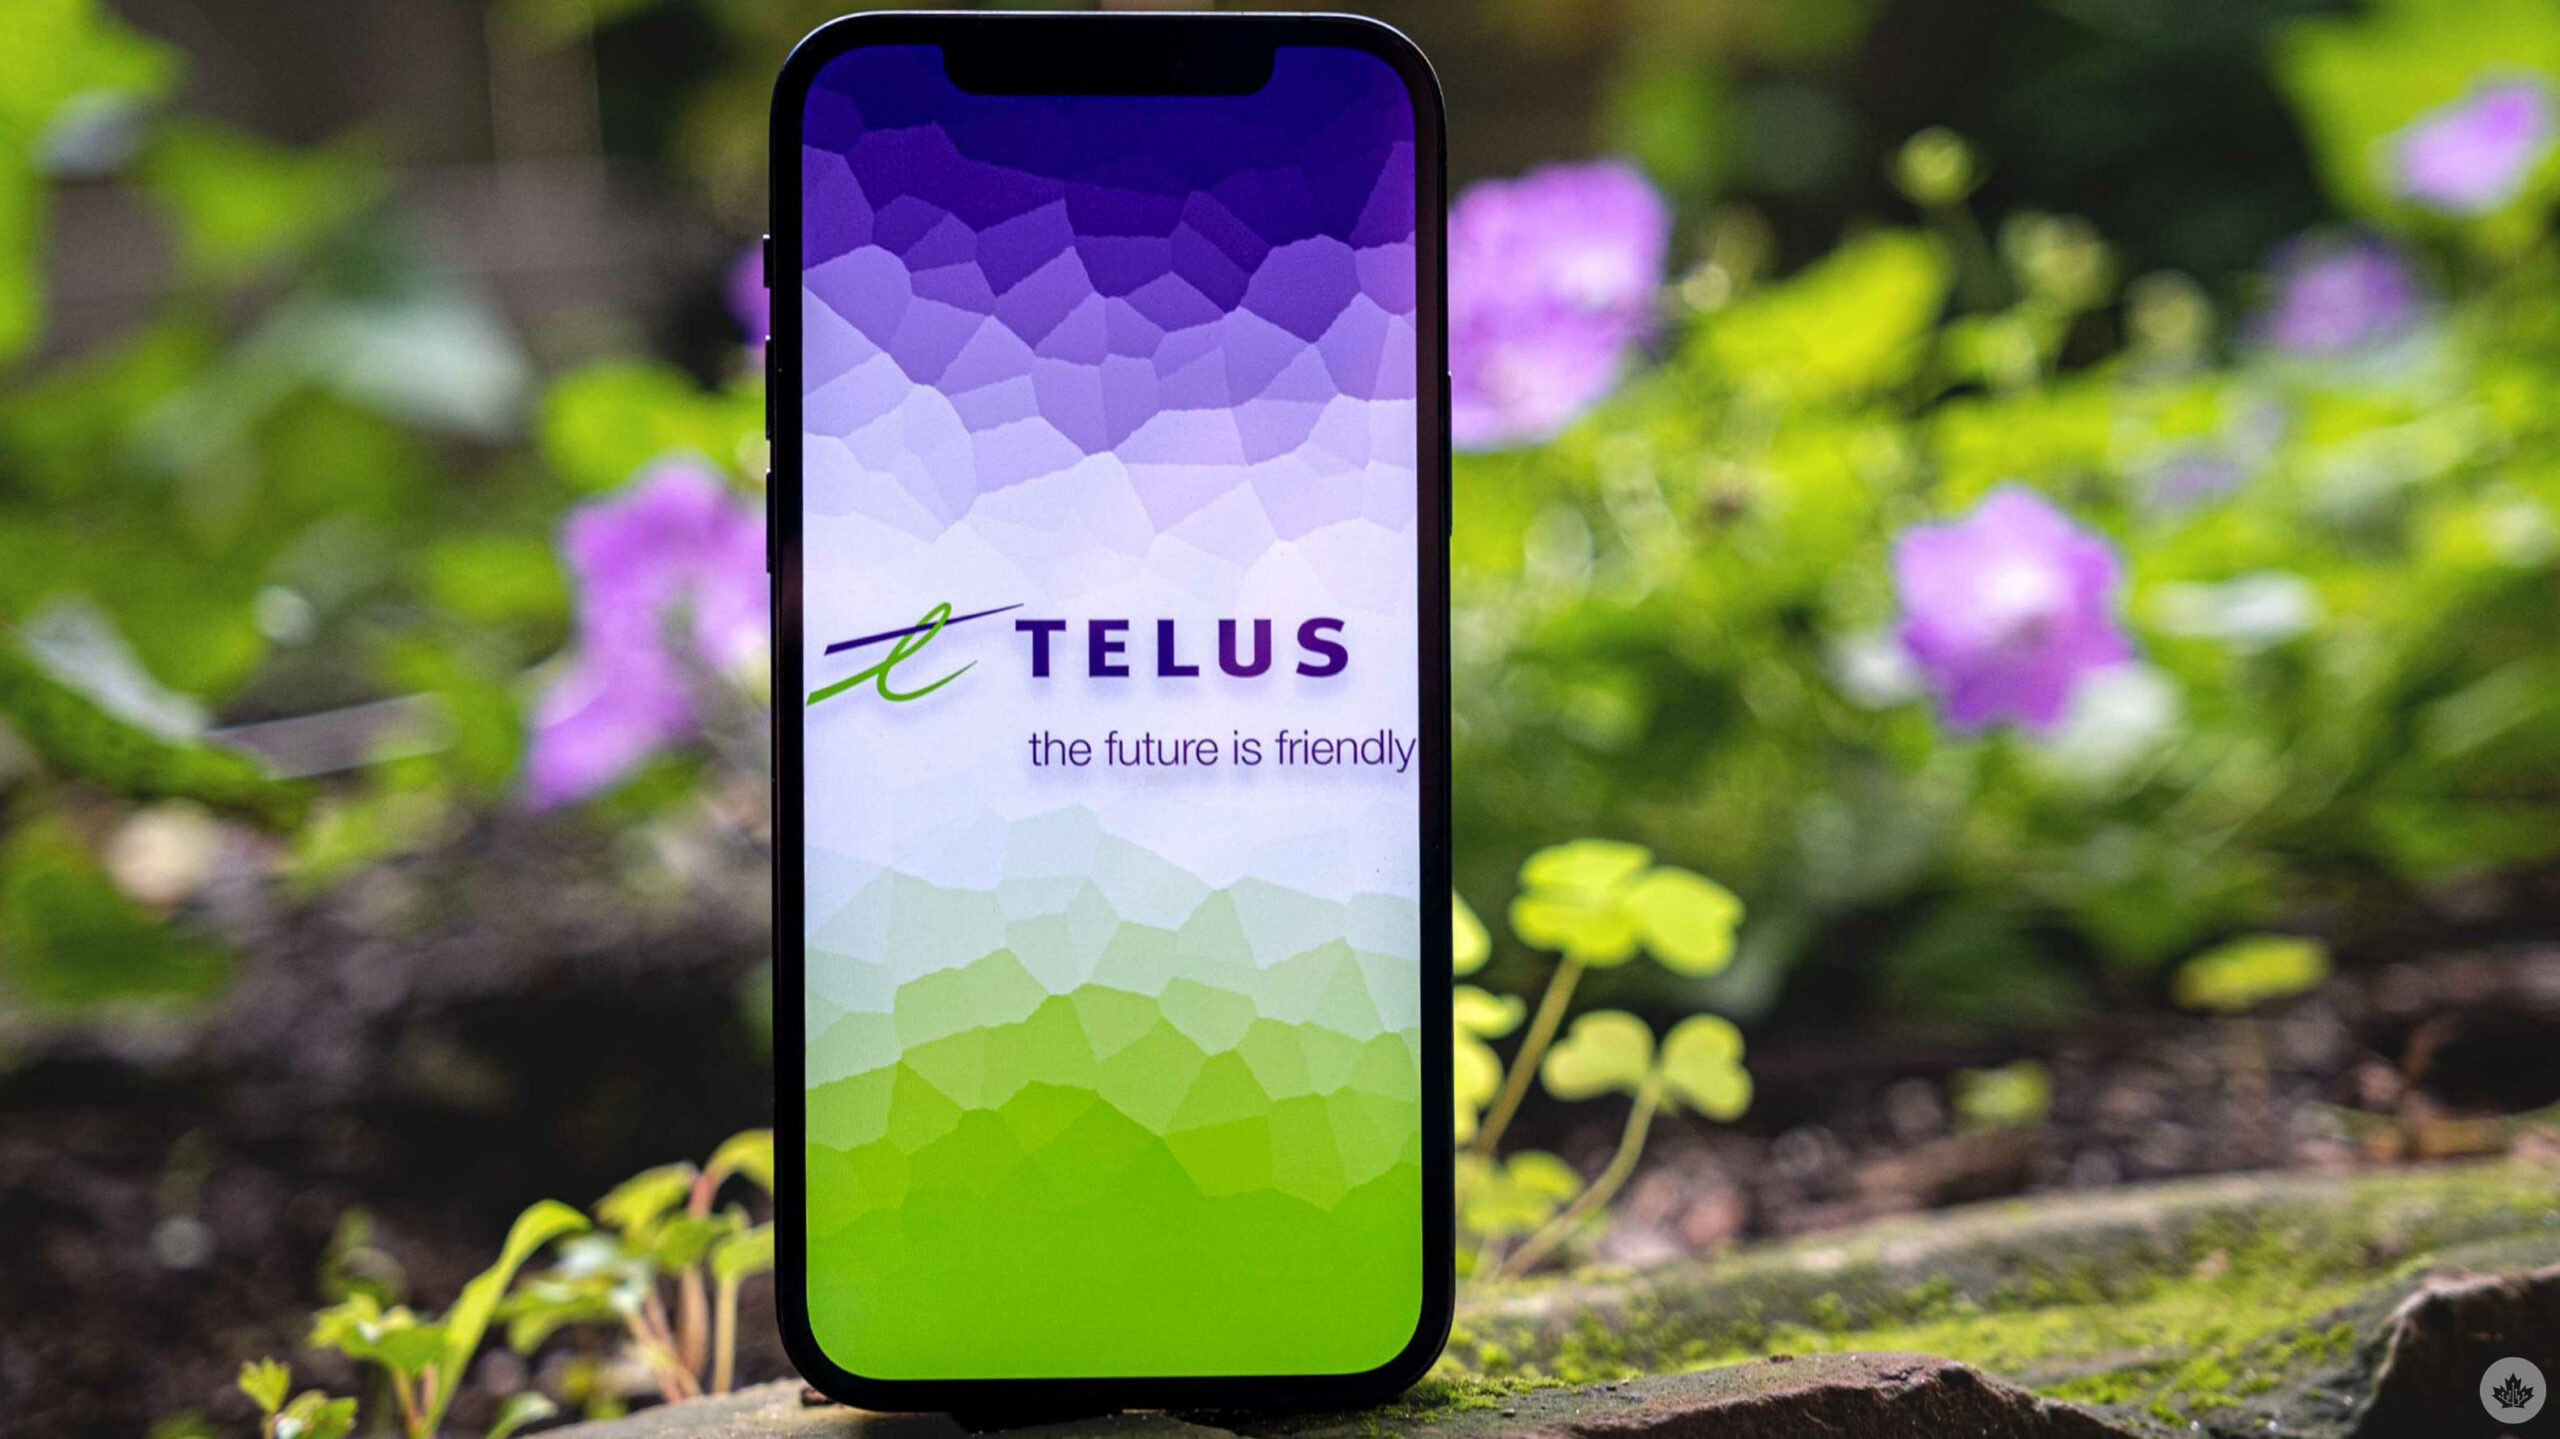 Telus now has a 150GB plan that costs 5/mo